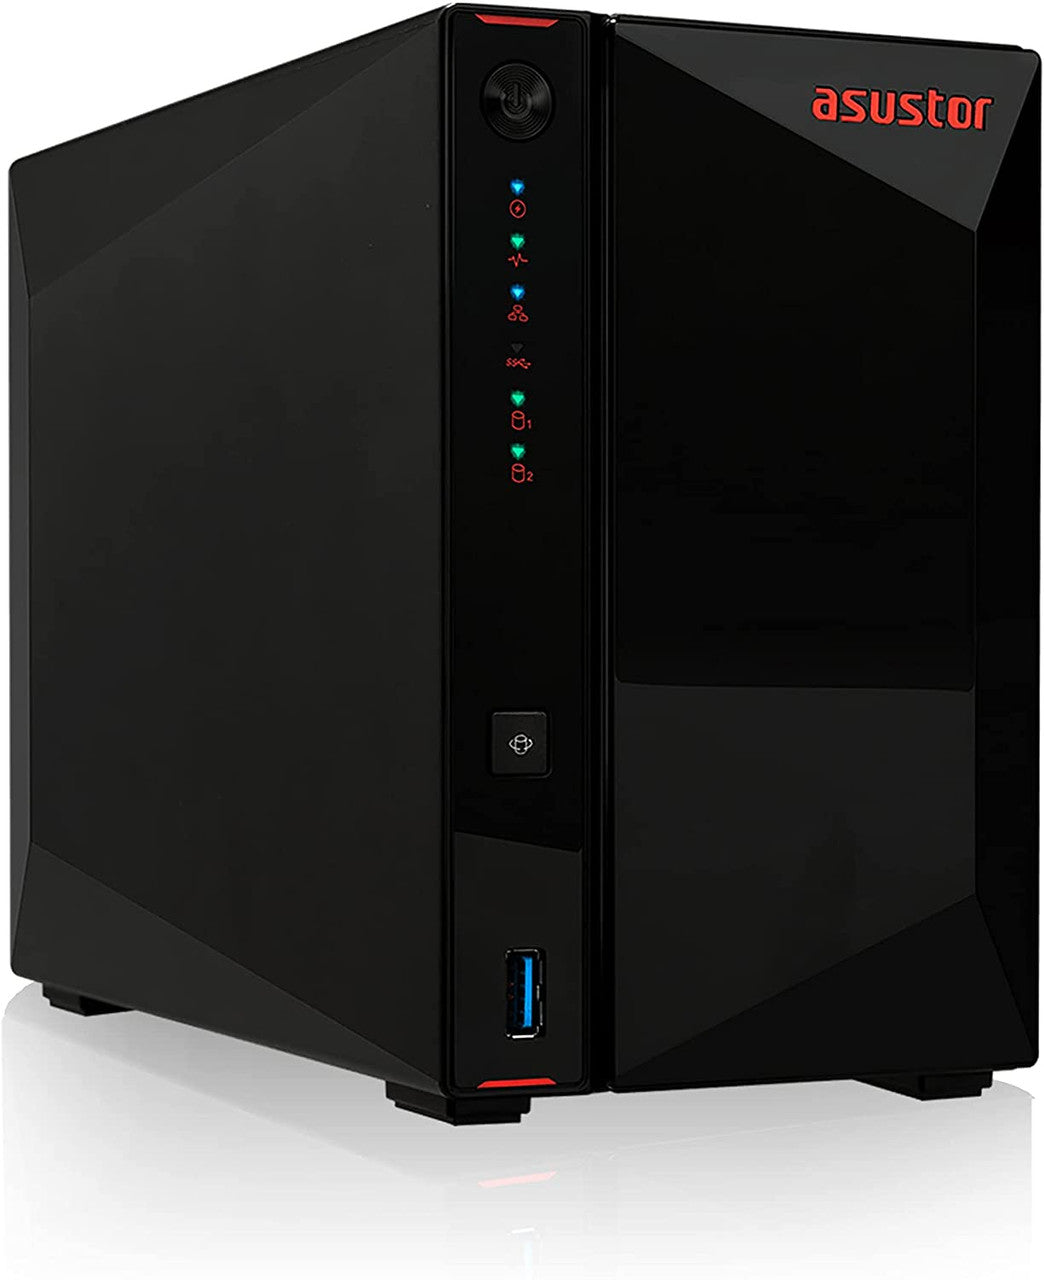 Asustor AS5202T 2-Bay Nimbustor 2 NAS with 8GB RAM and 4TB (2 x 2TB) Western Digital RED Plus Drives Fully Assembled and Tested